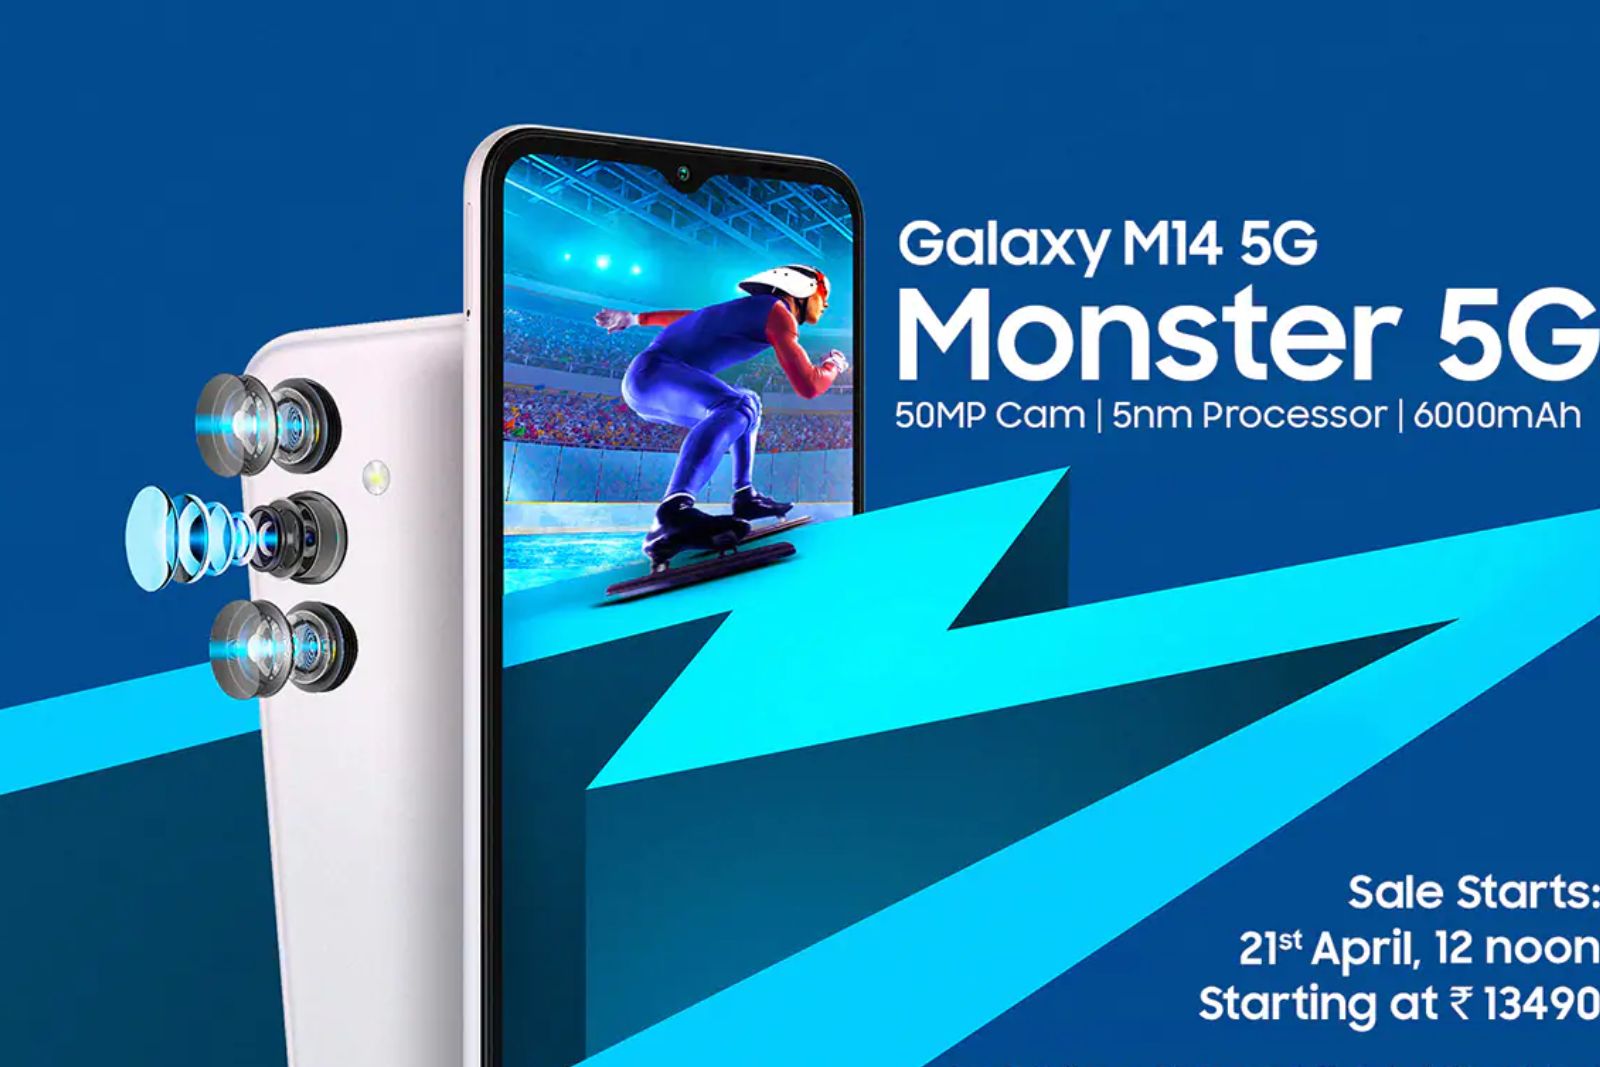 Galaxy M14 up for sale in India